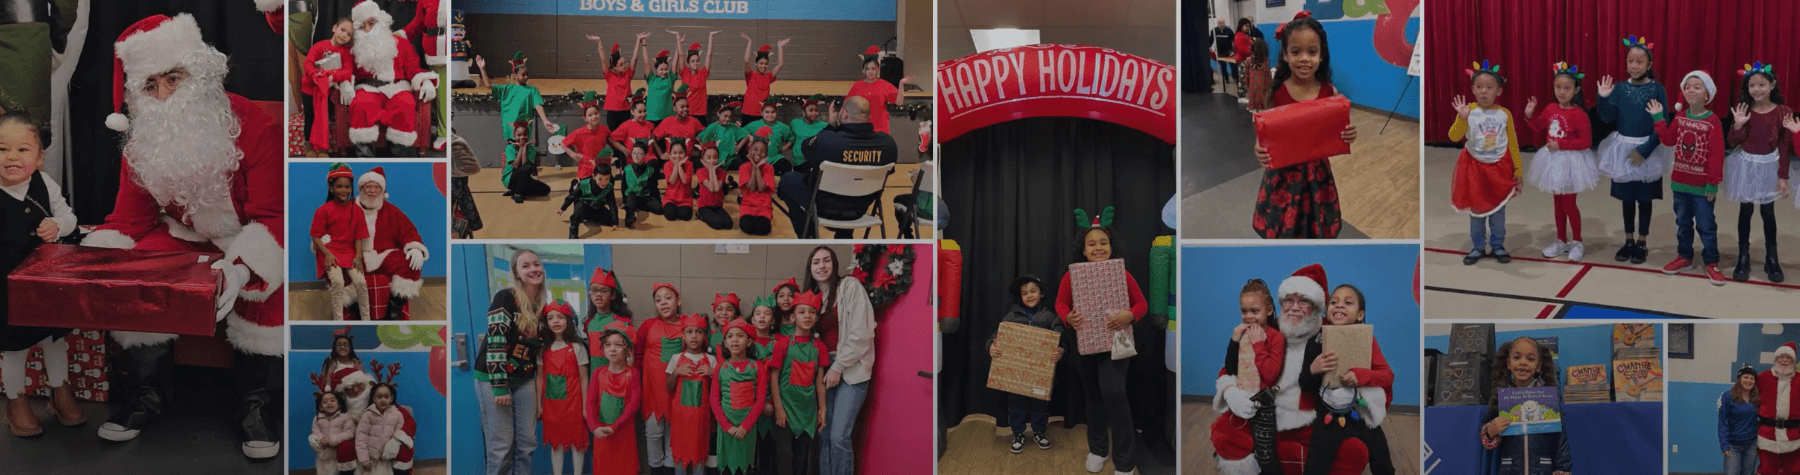 Spreading Holiday Cheer with the Boys & Girls Club Toy Drive